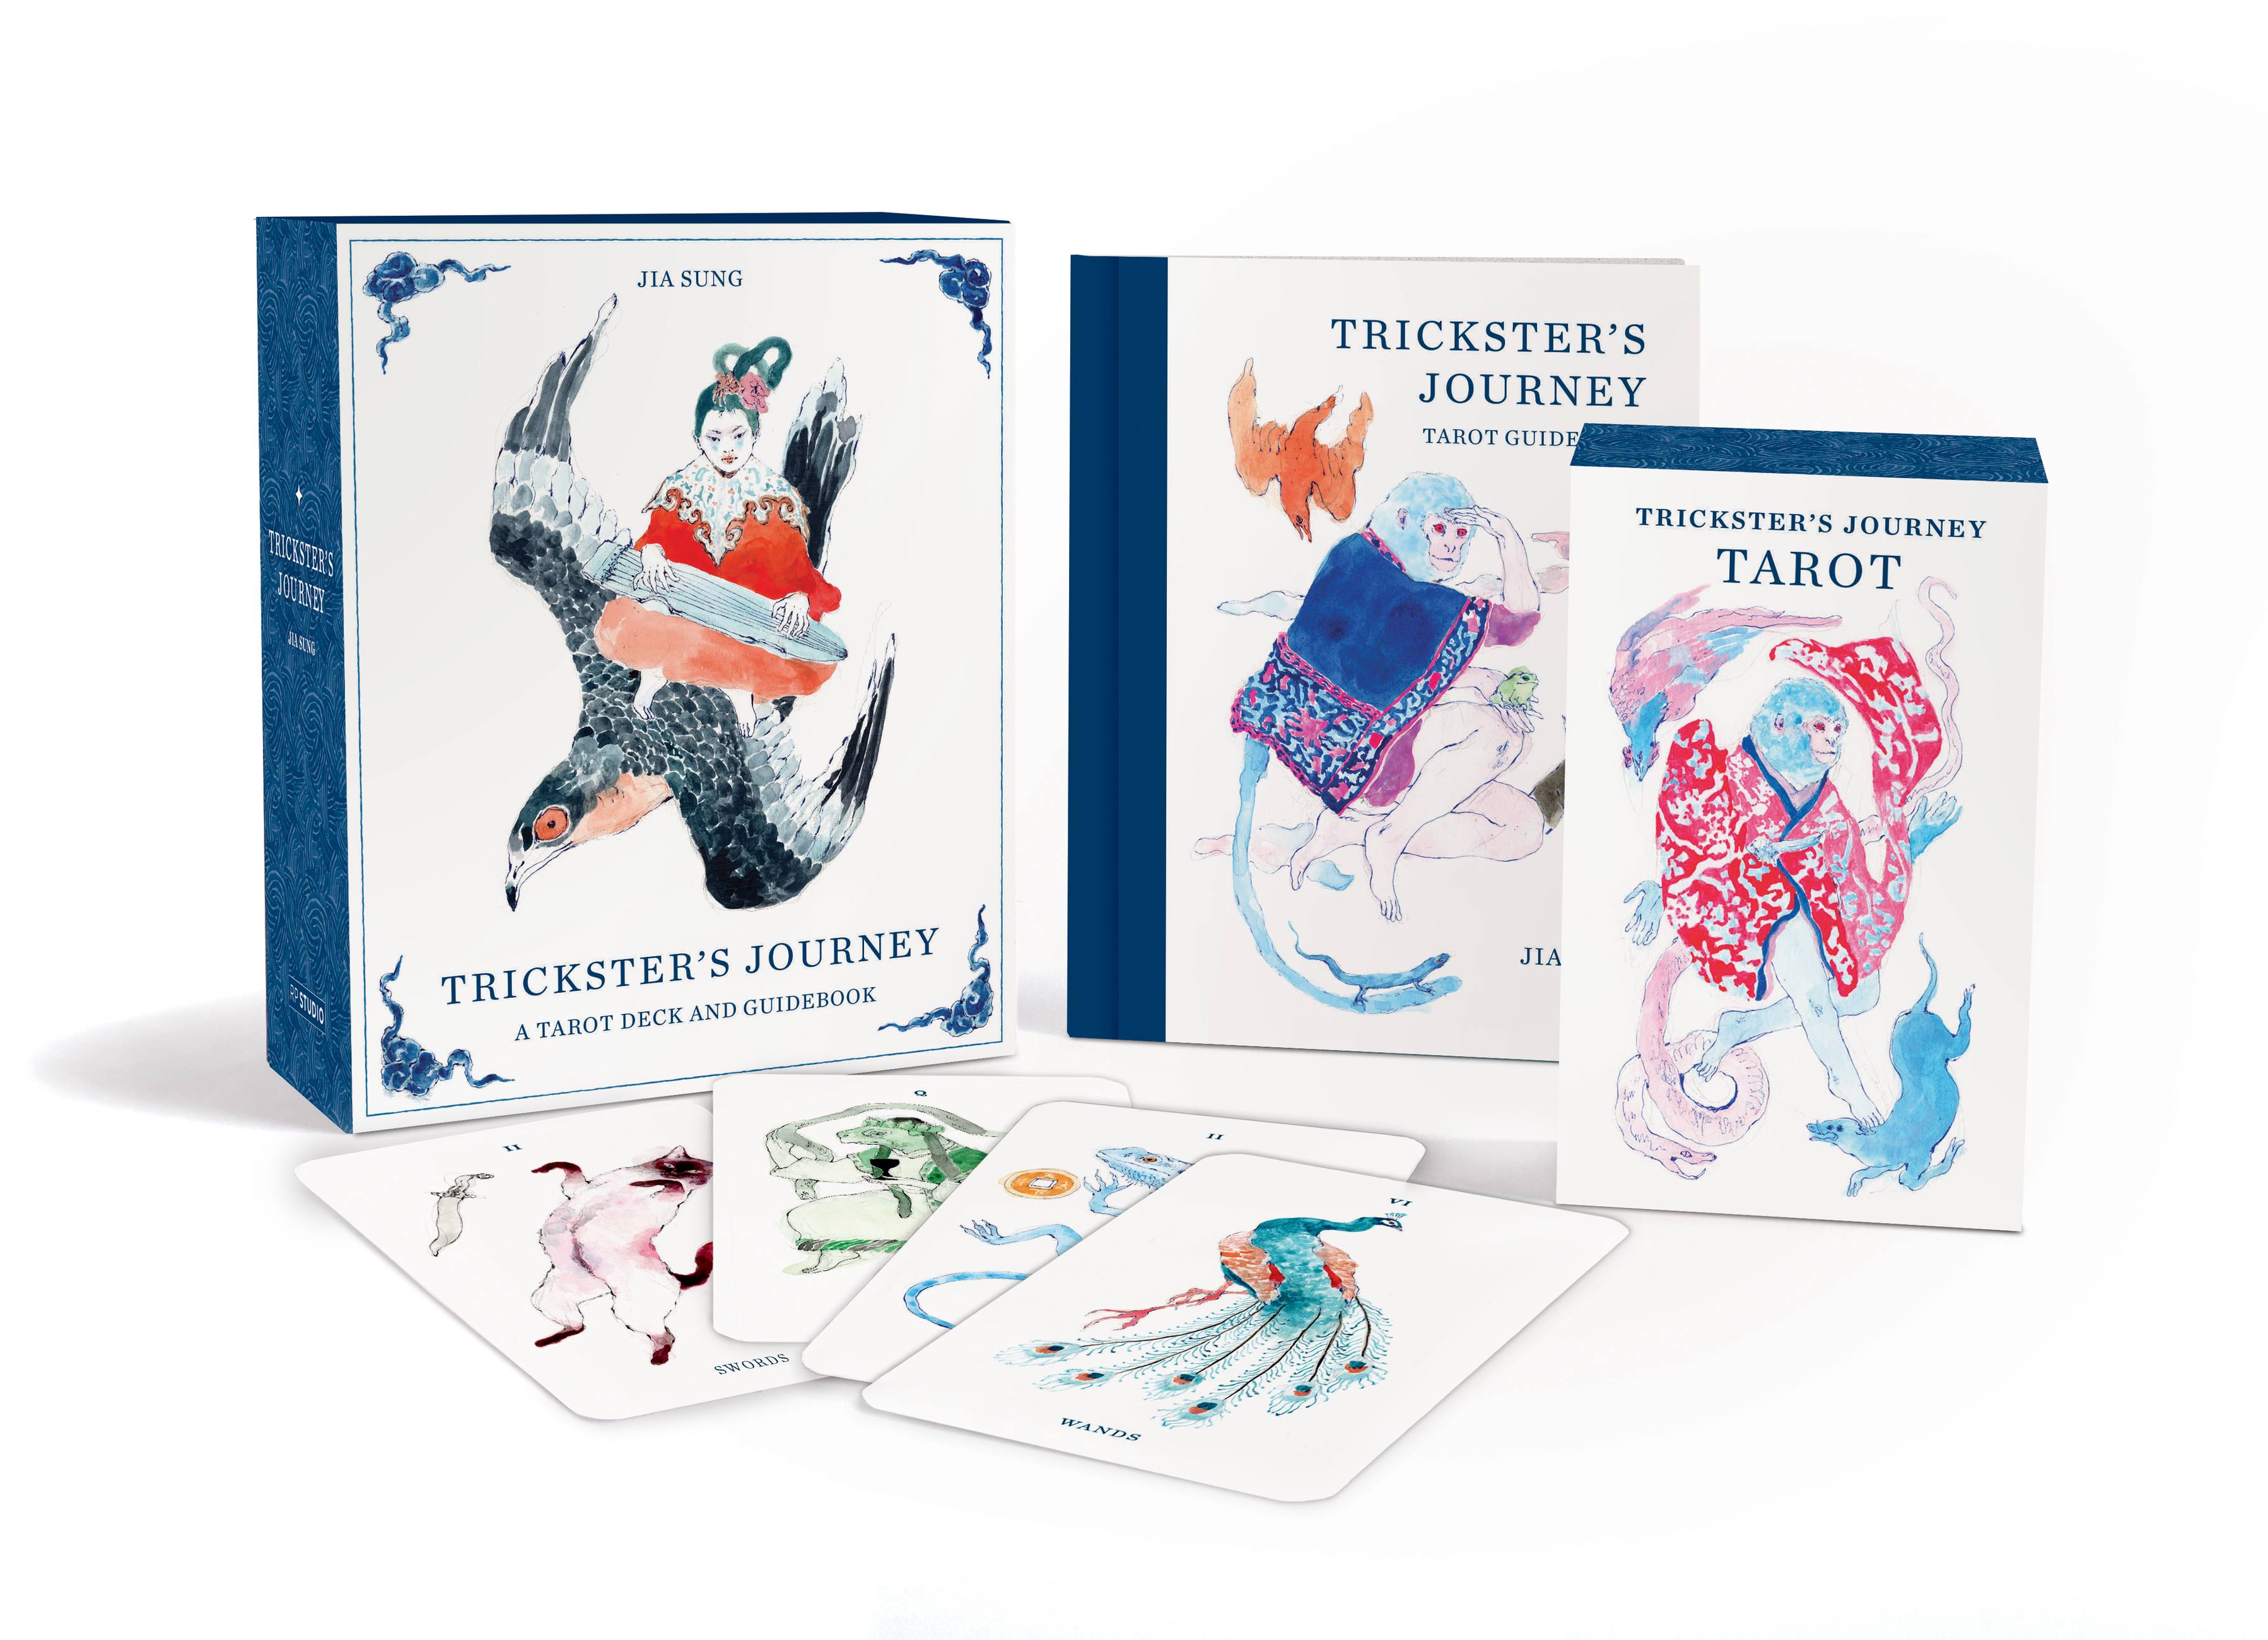 Trickster's by Jia Sung | Hachette Book Group